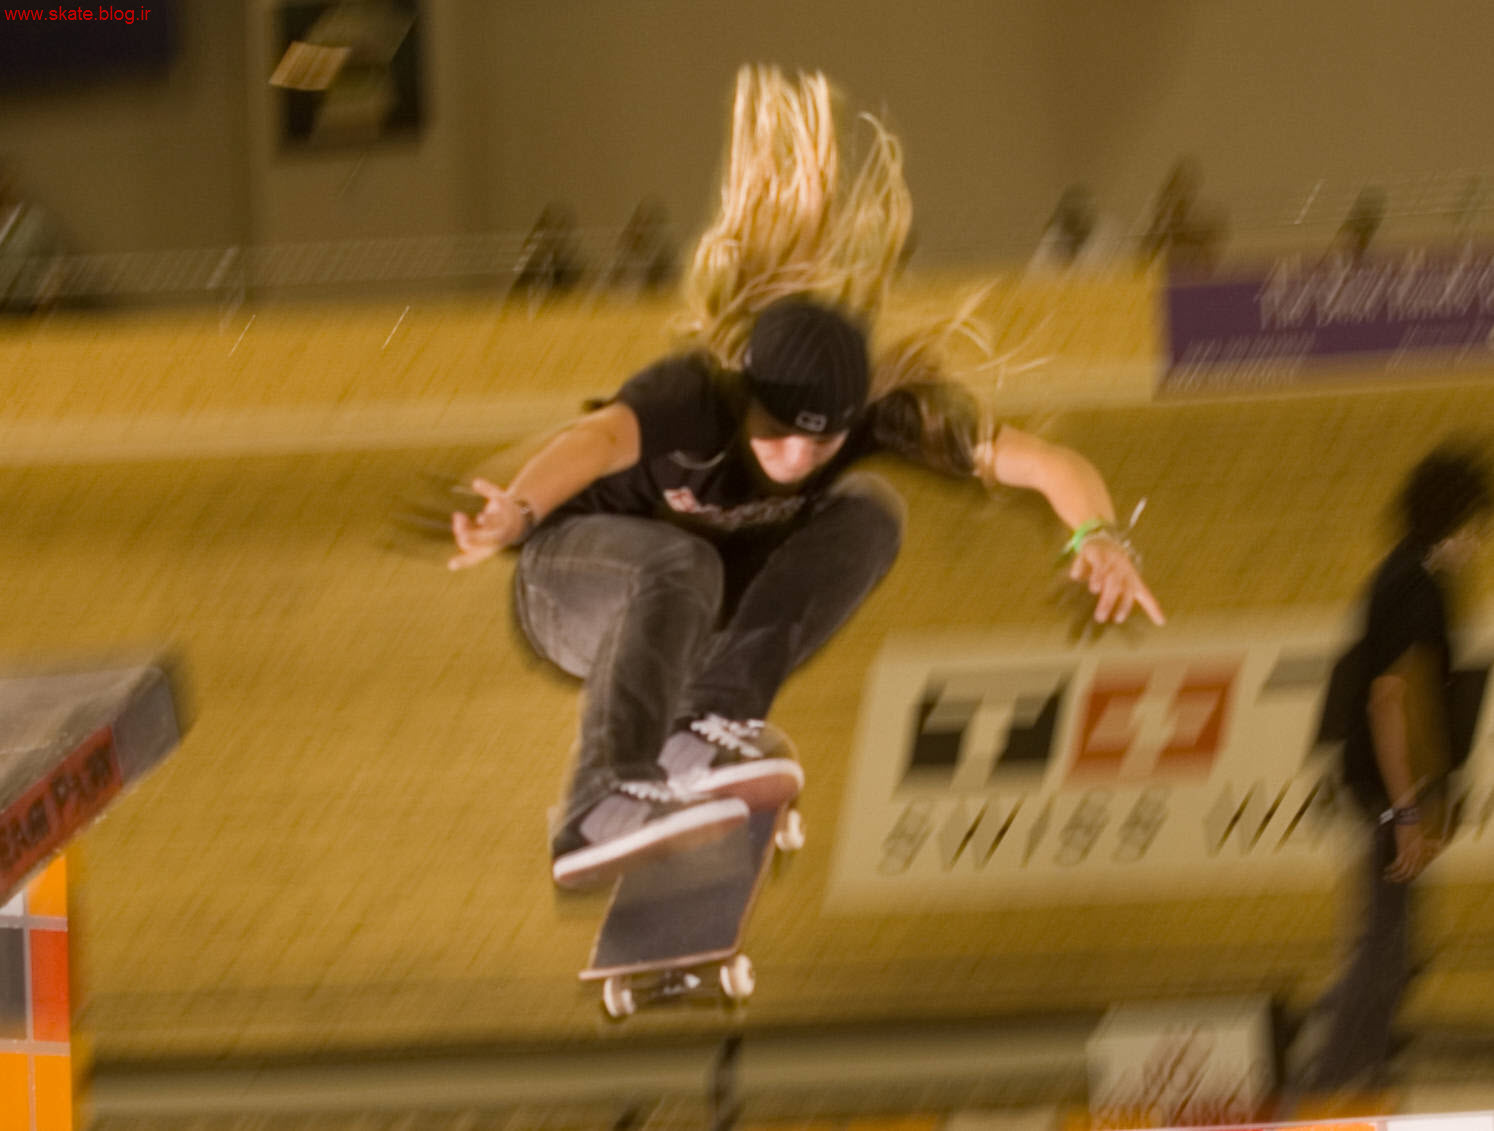 http://s6.picofile.com/file/8252324492/54_Nollie_Lacey_Baker_Kanights_ESPN2.jpg